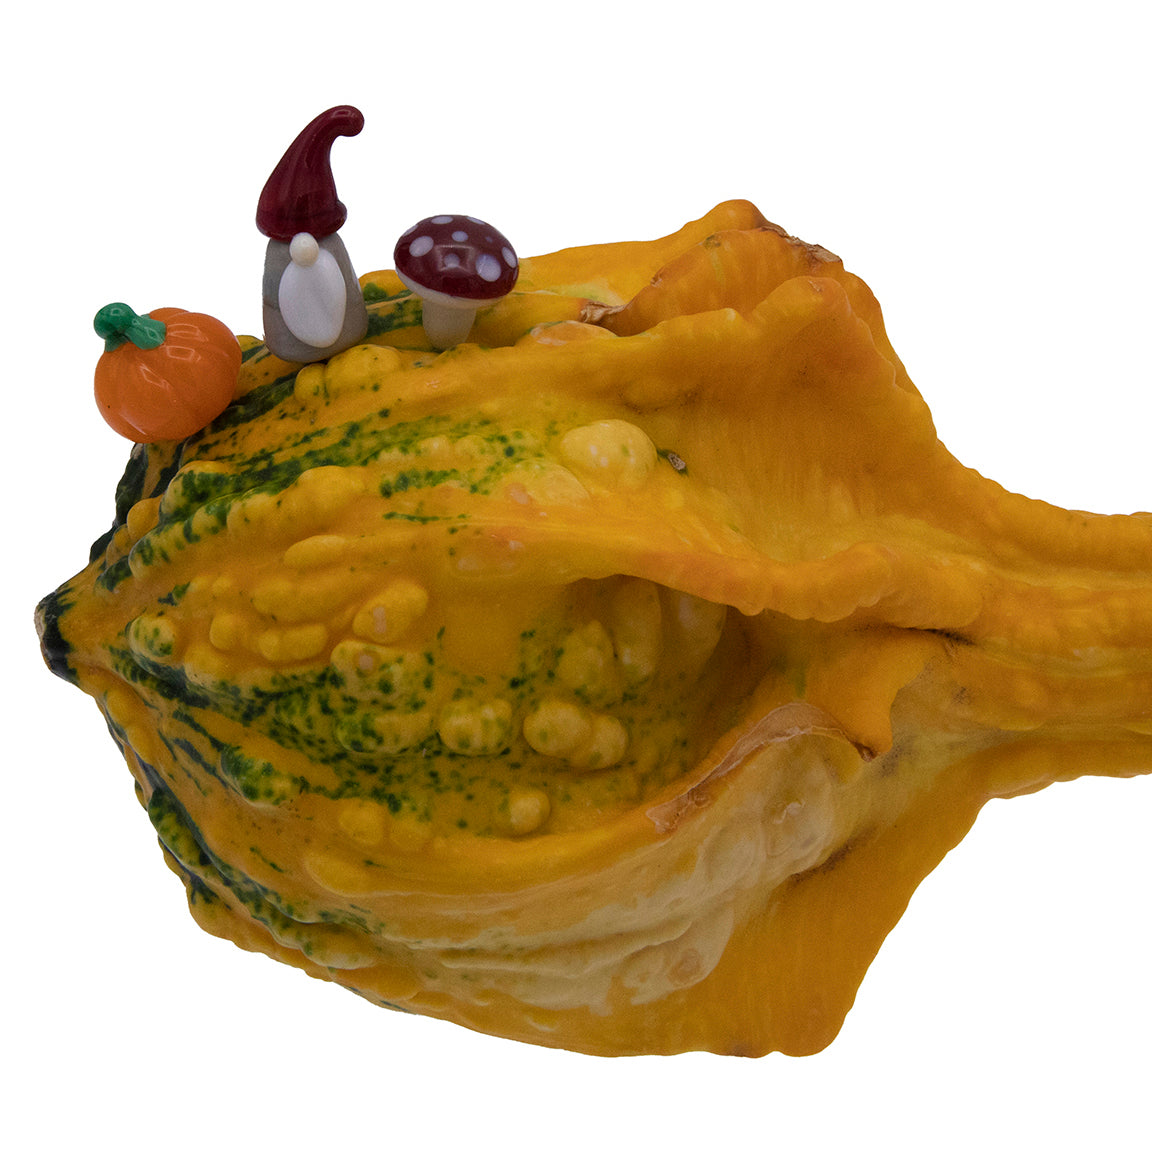 Three tiny plant decorations sit on a yellow and green ornamental squash. The decorations are an orange pumpkin with green stalk, a gnome with red pointy hat and white beard and a mushroom with a red cap and white spots.